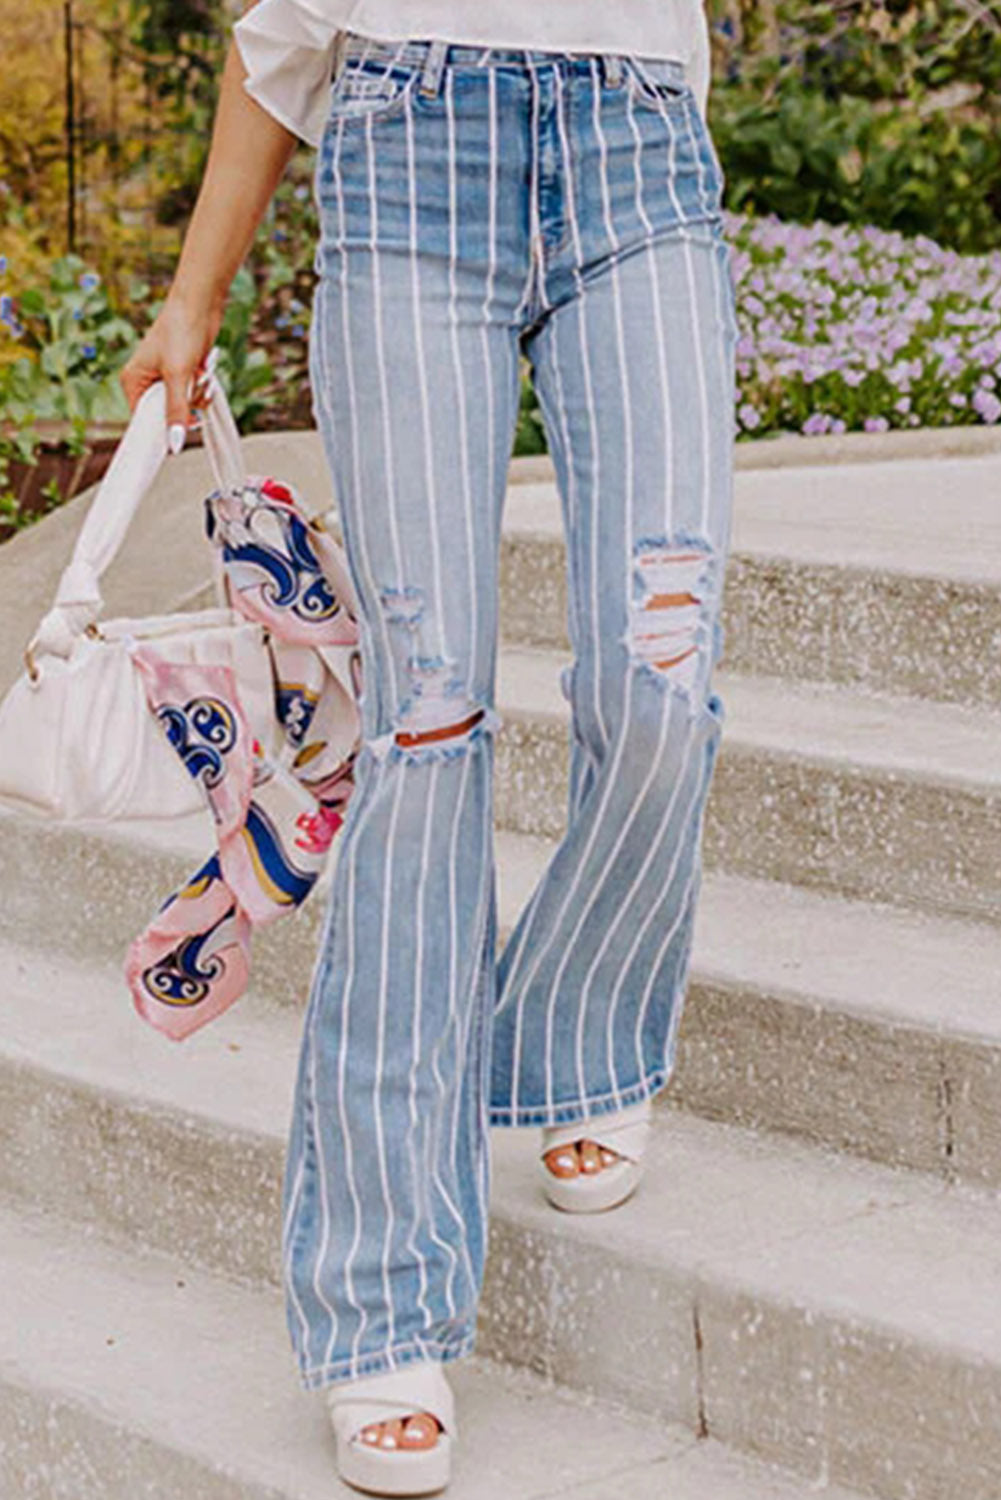 Vertical Striped Ripped Flare Jeans